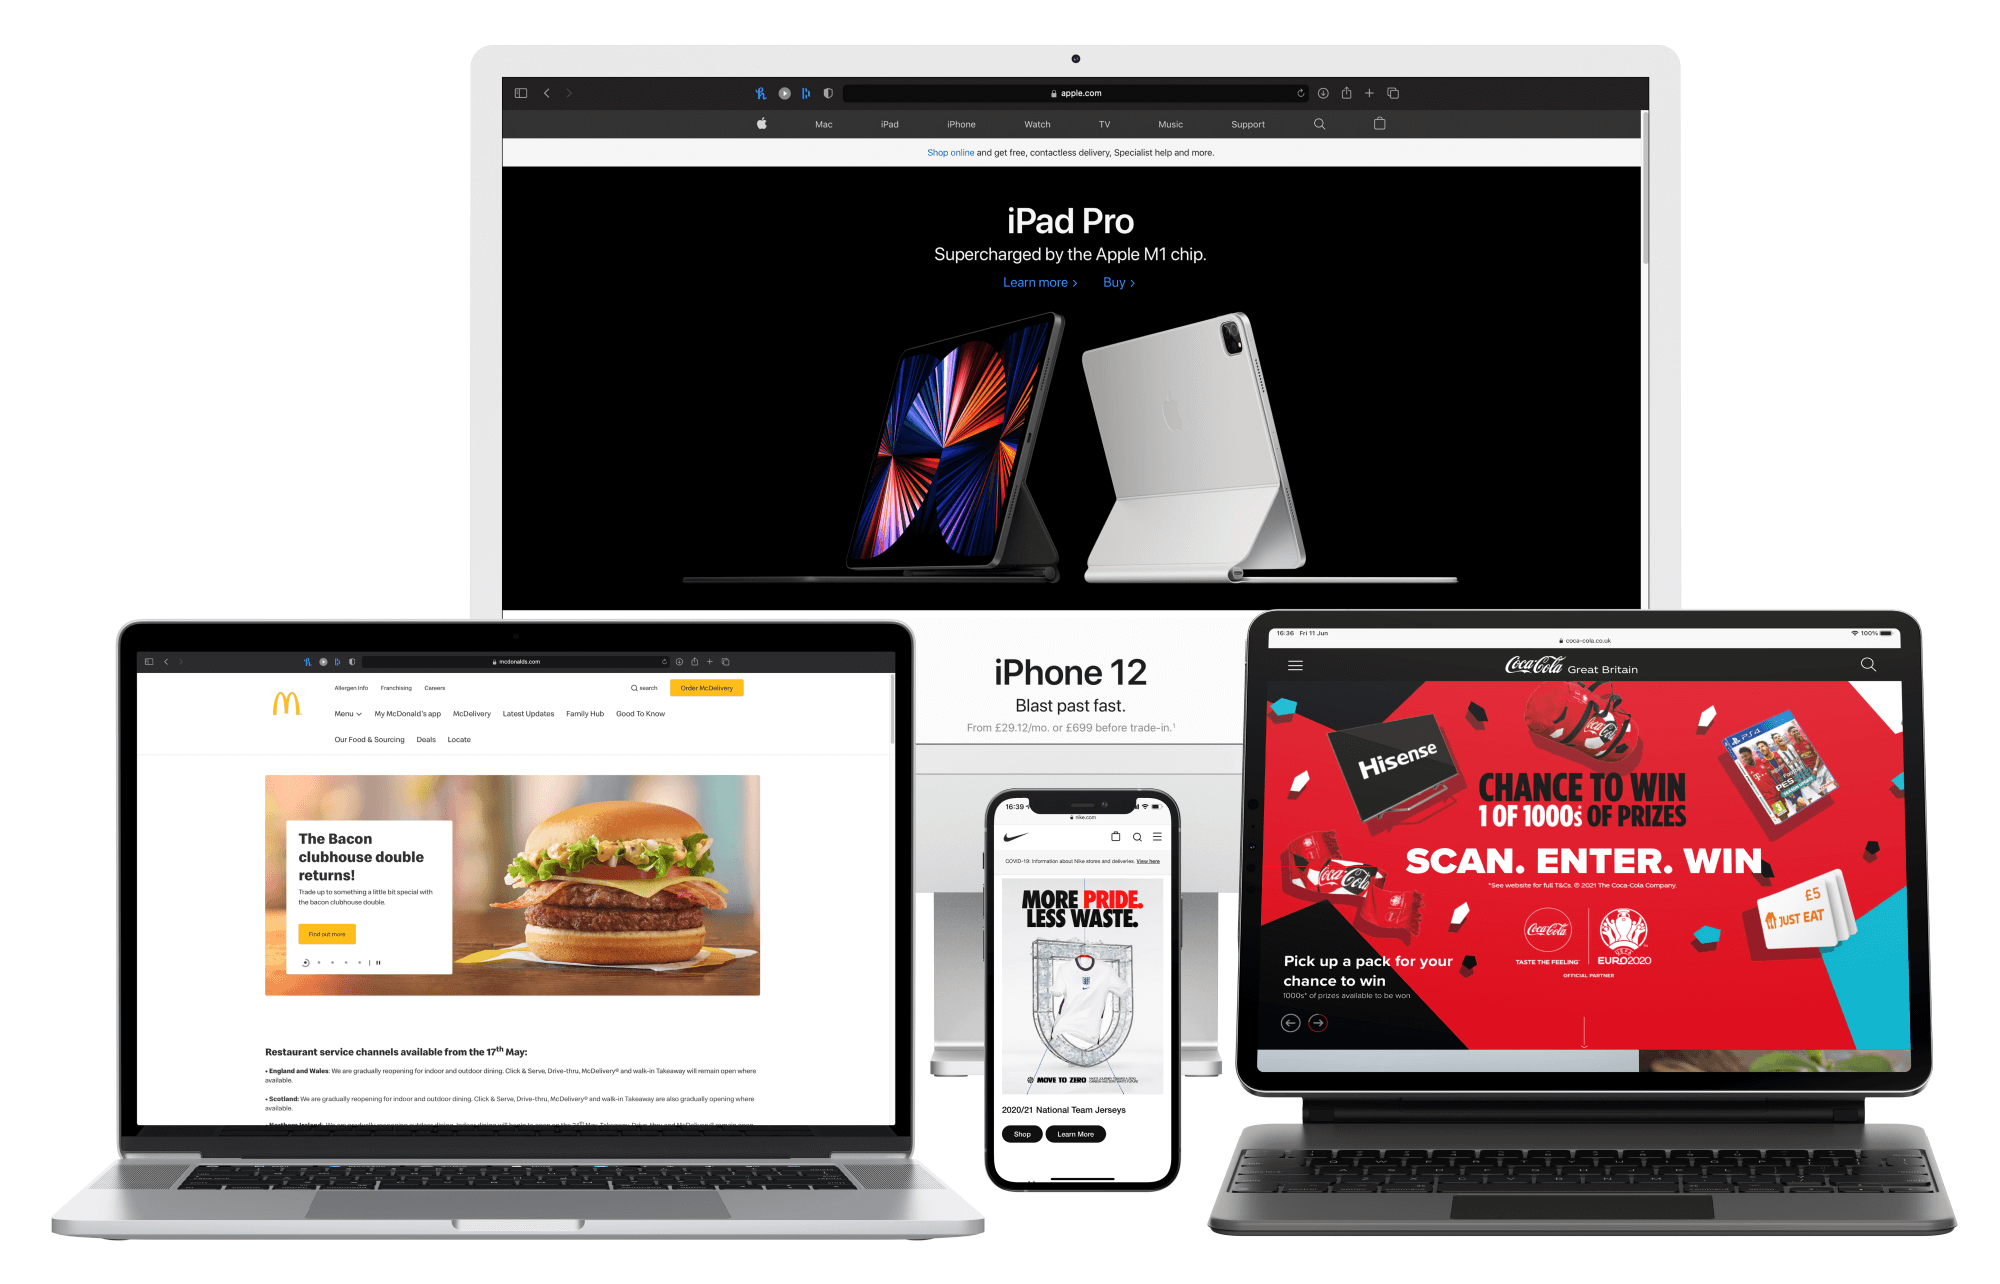 A selection of Apple computer products from iPhone, Mac and Macbook laptops. All with various famous brand website homepages such as Coca-Cola, Nike, McDonalds and the Apple website itself.